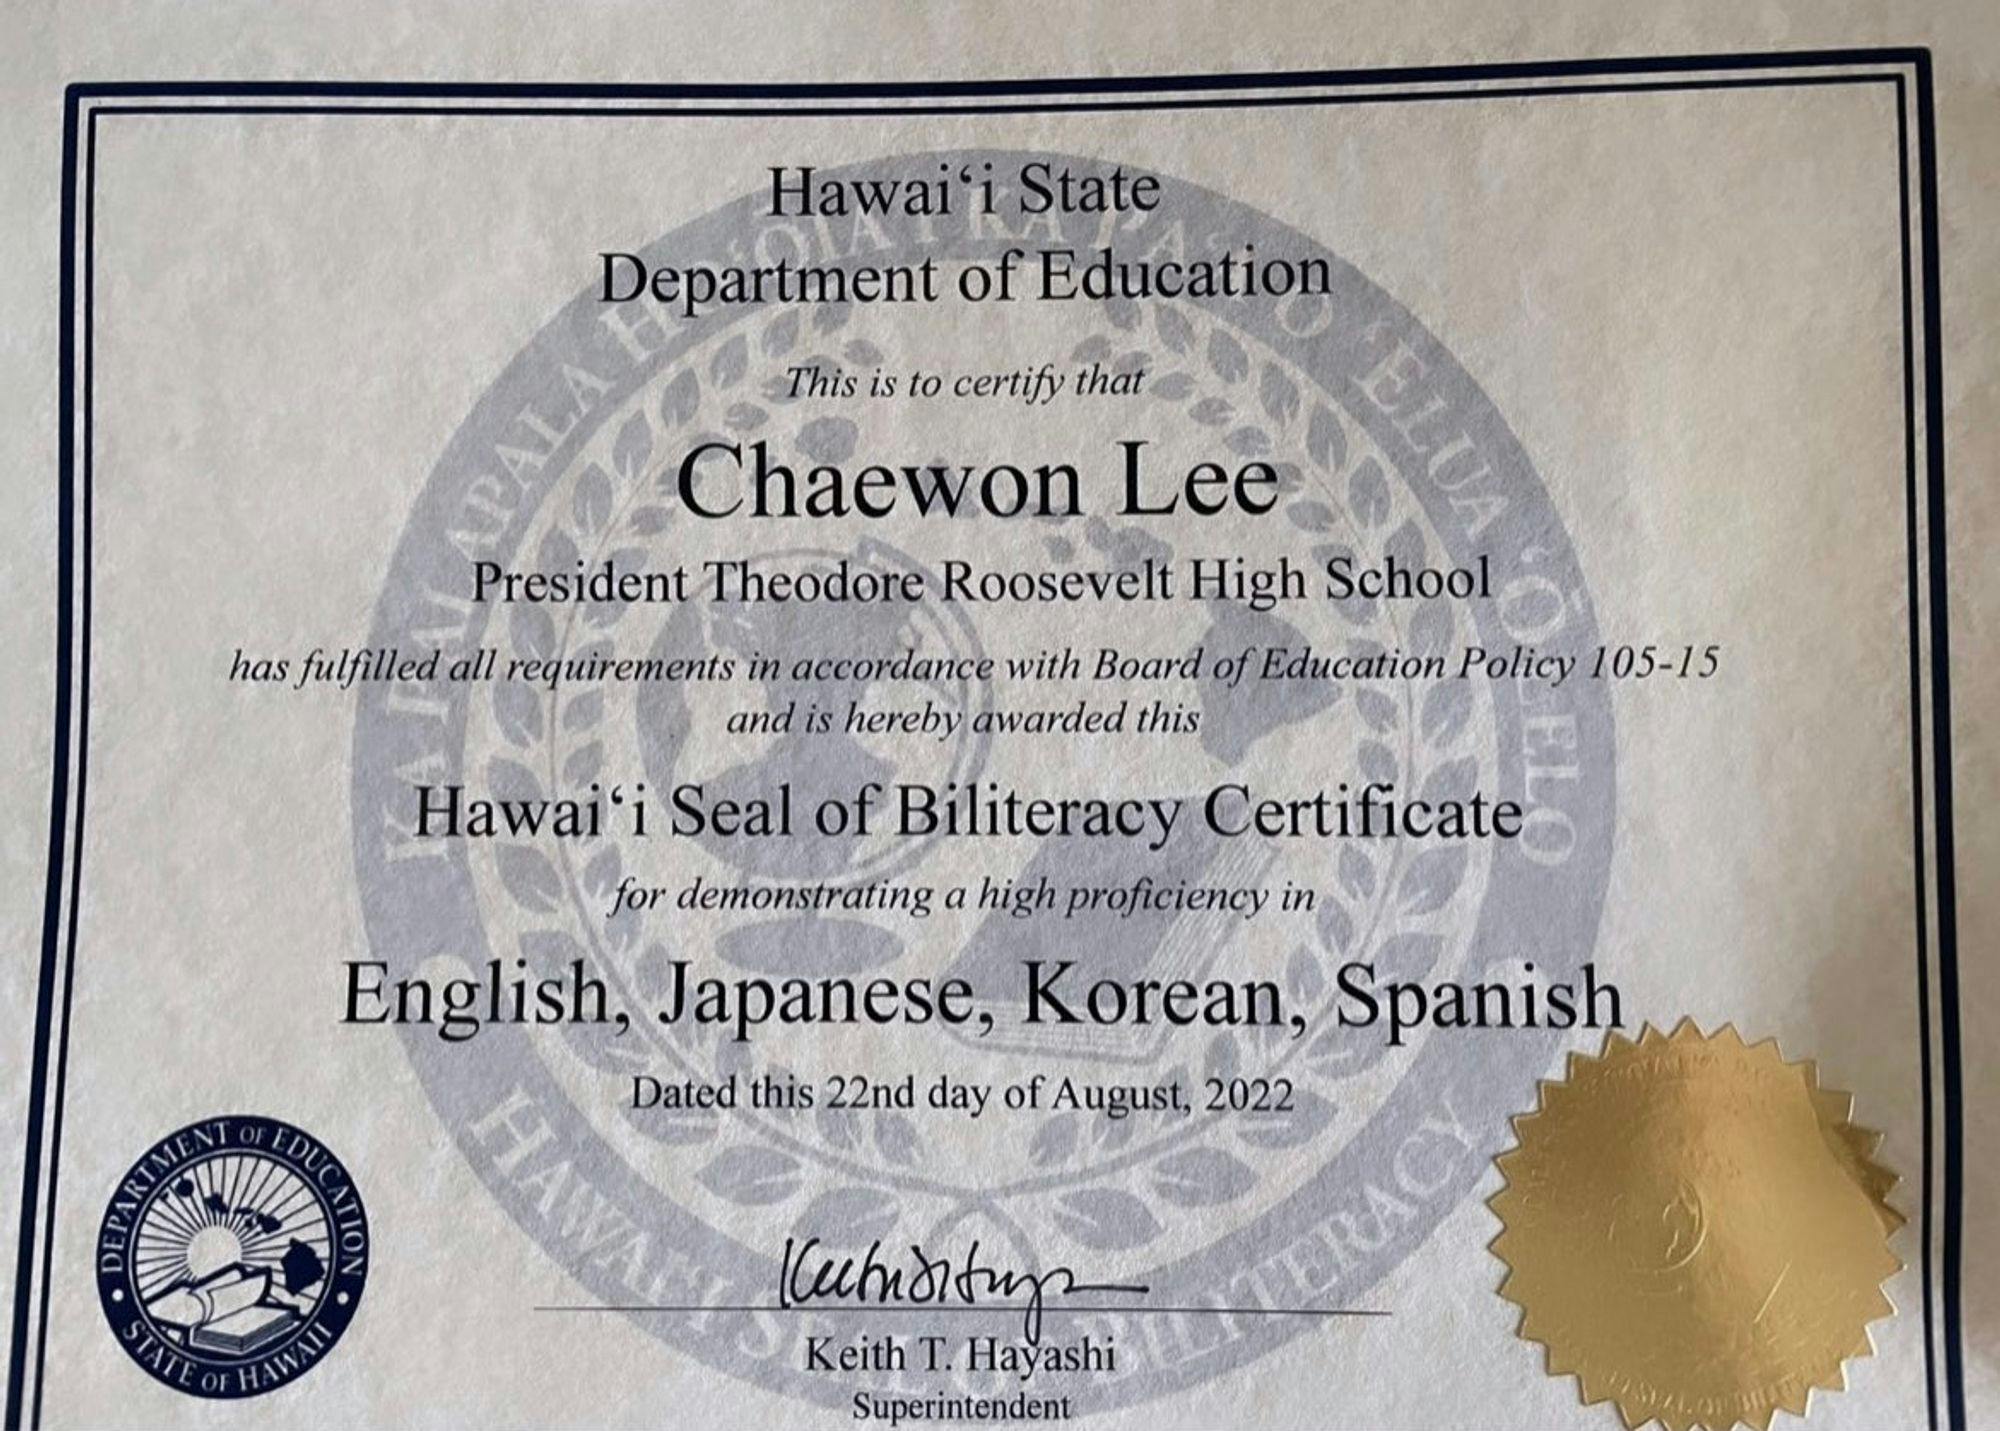 Chaewon Lee was my name before I got naturalized. Passing this Biliteracy test is equivalent to being able to live in a community where the language is spoken fluently.